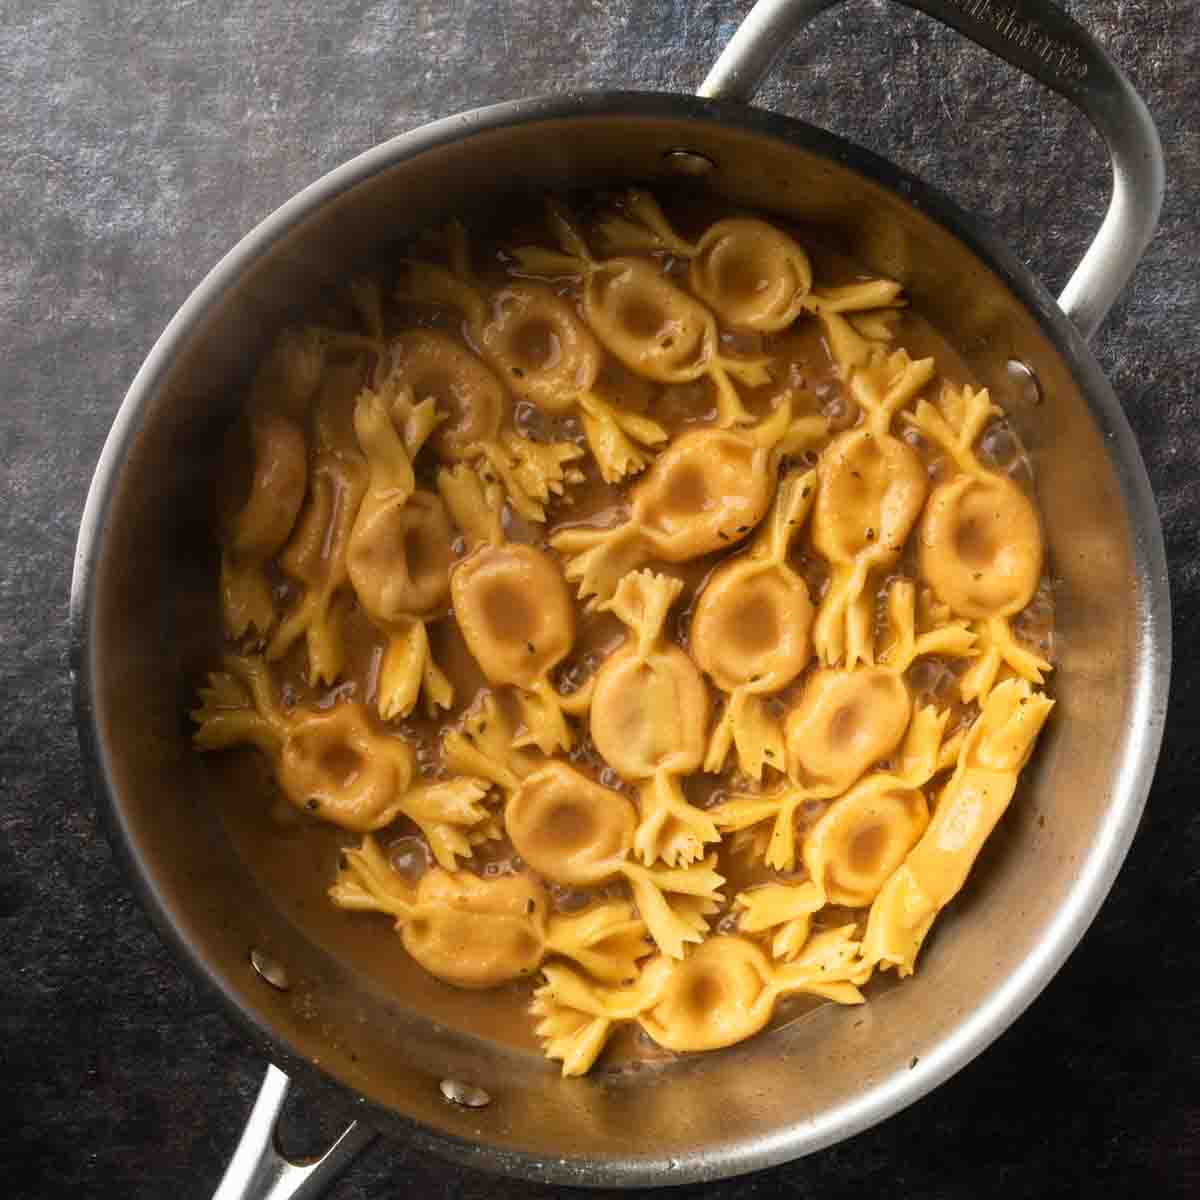 Homemade caramelle pasta simmering in a pan of brown butter balsamic sauce.